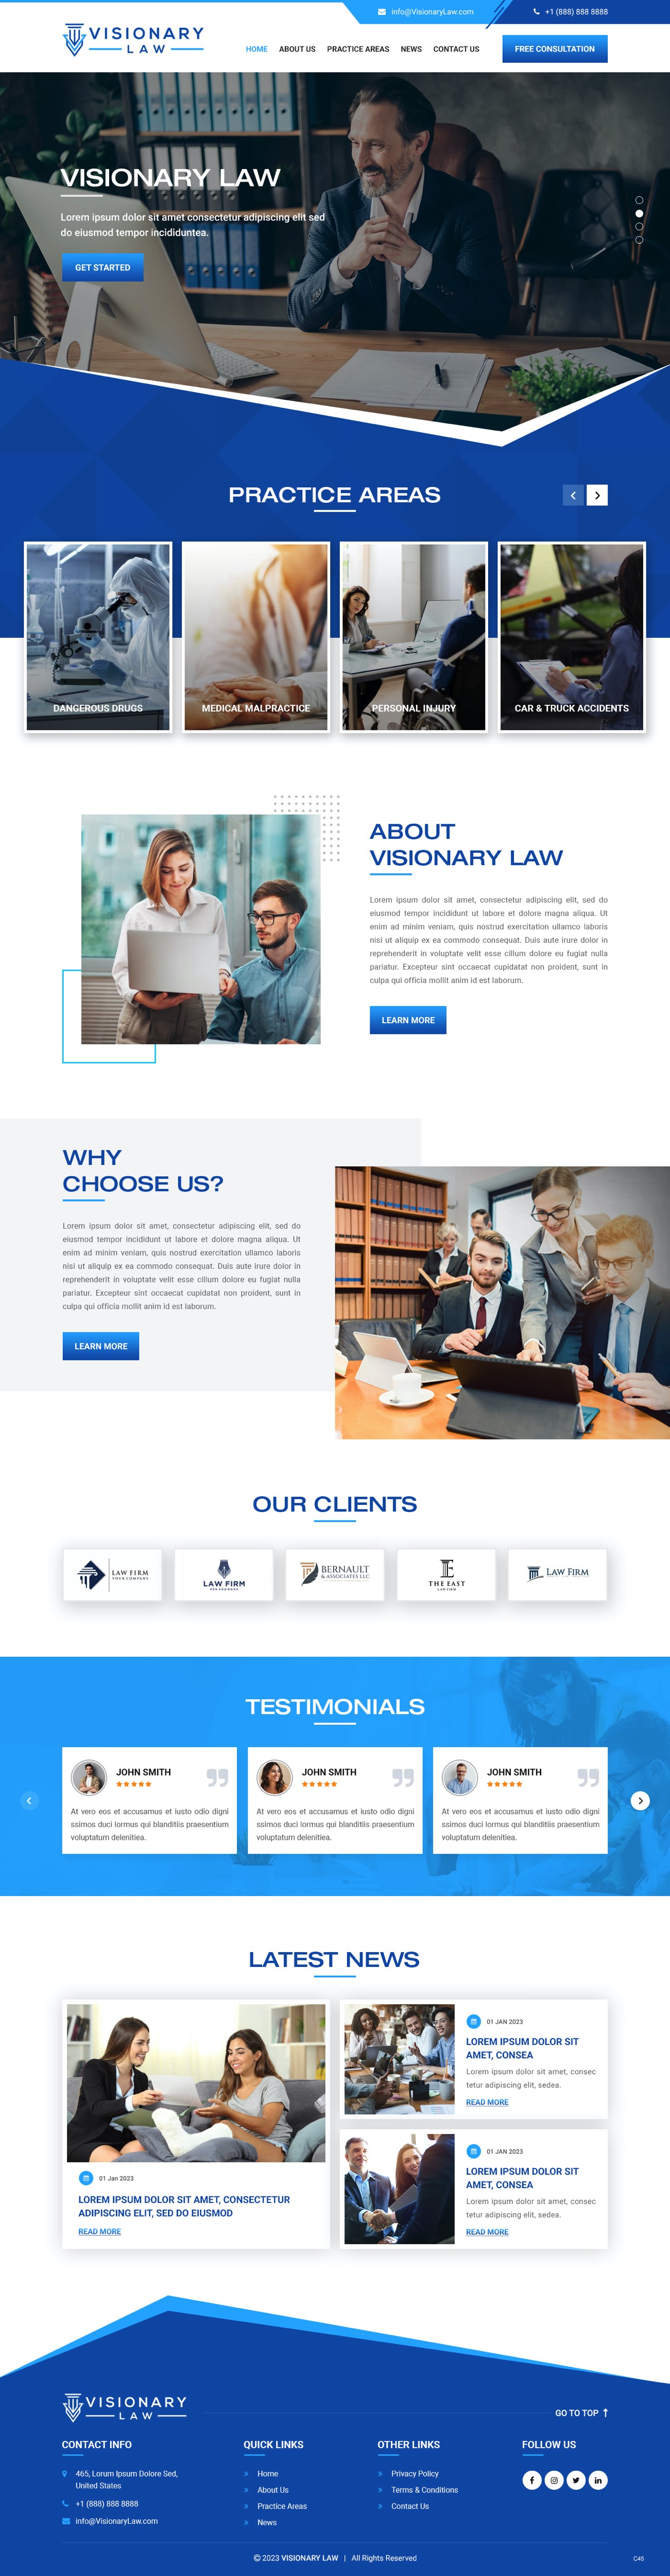 Personal Injury Attorney website design example